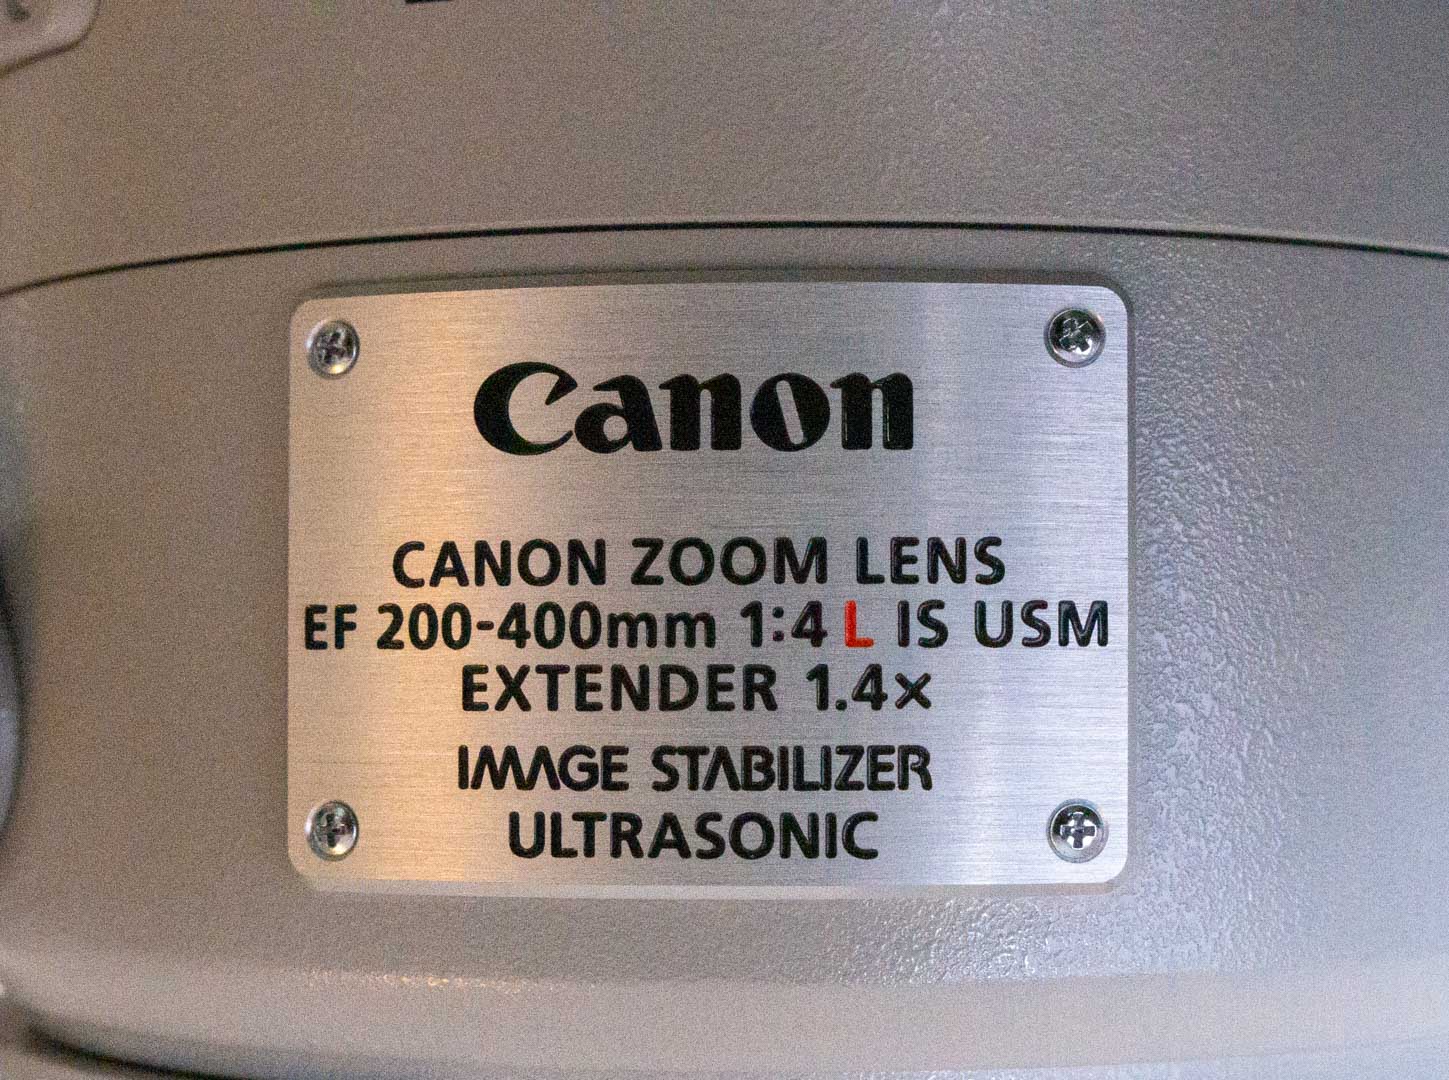 Tele-zoom Canon EF 200-400mm / f:4L IS USM cu Extender 1.4X